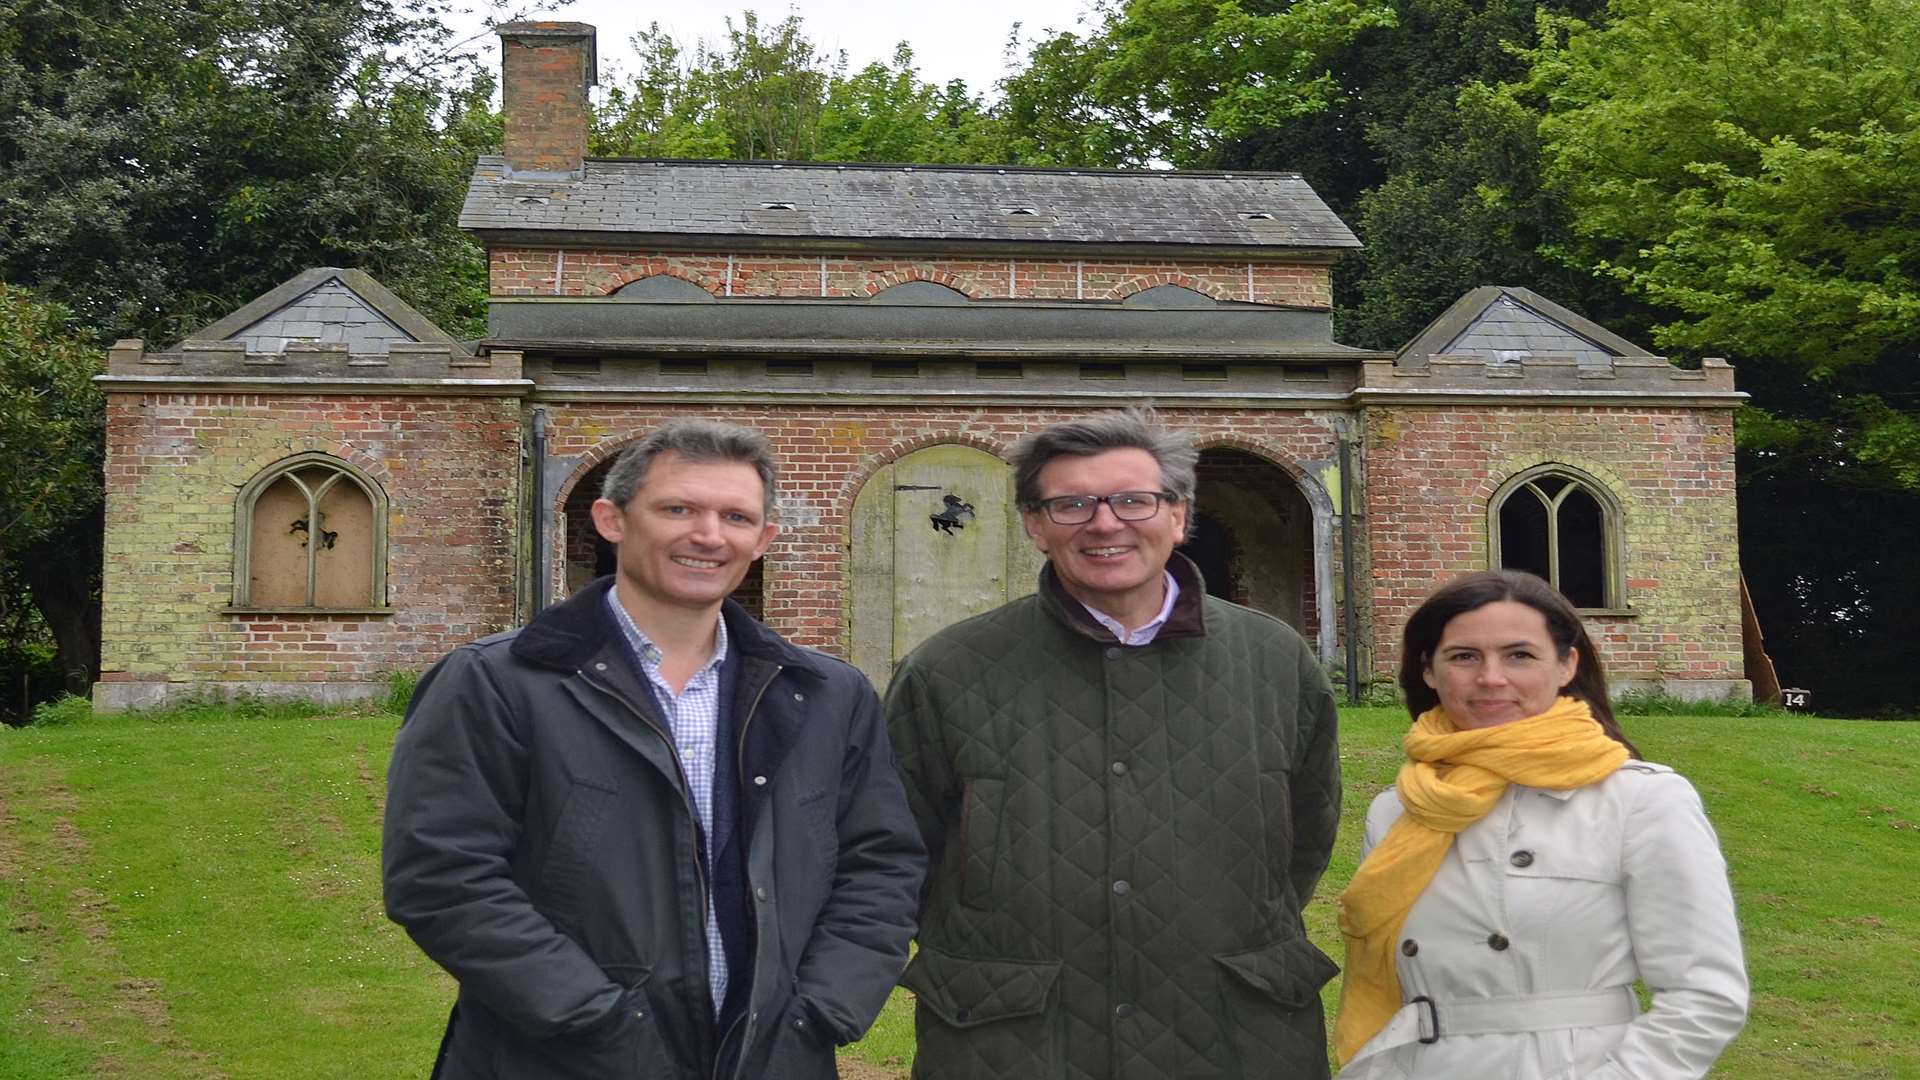 Alastair Dick-Cleland, Mark Hews and Dr Anna Keay outside Cobham Dairy